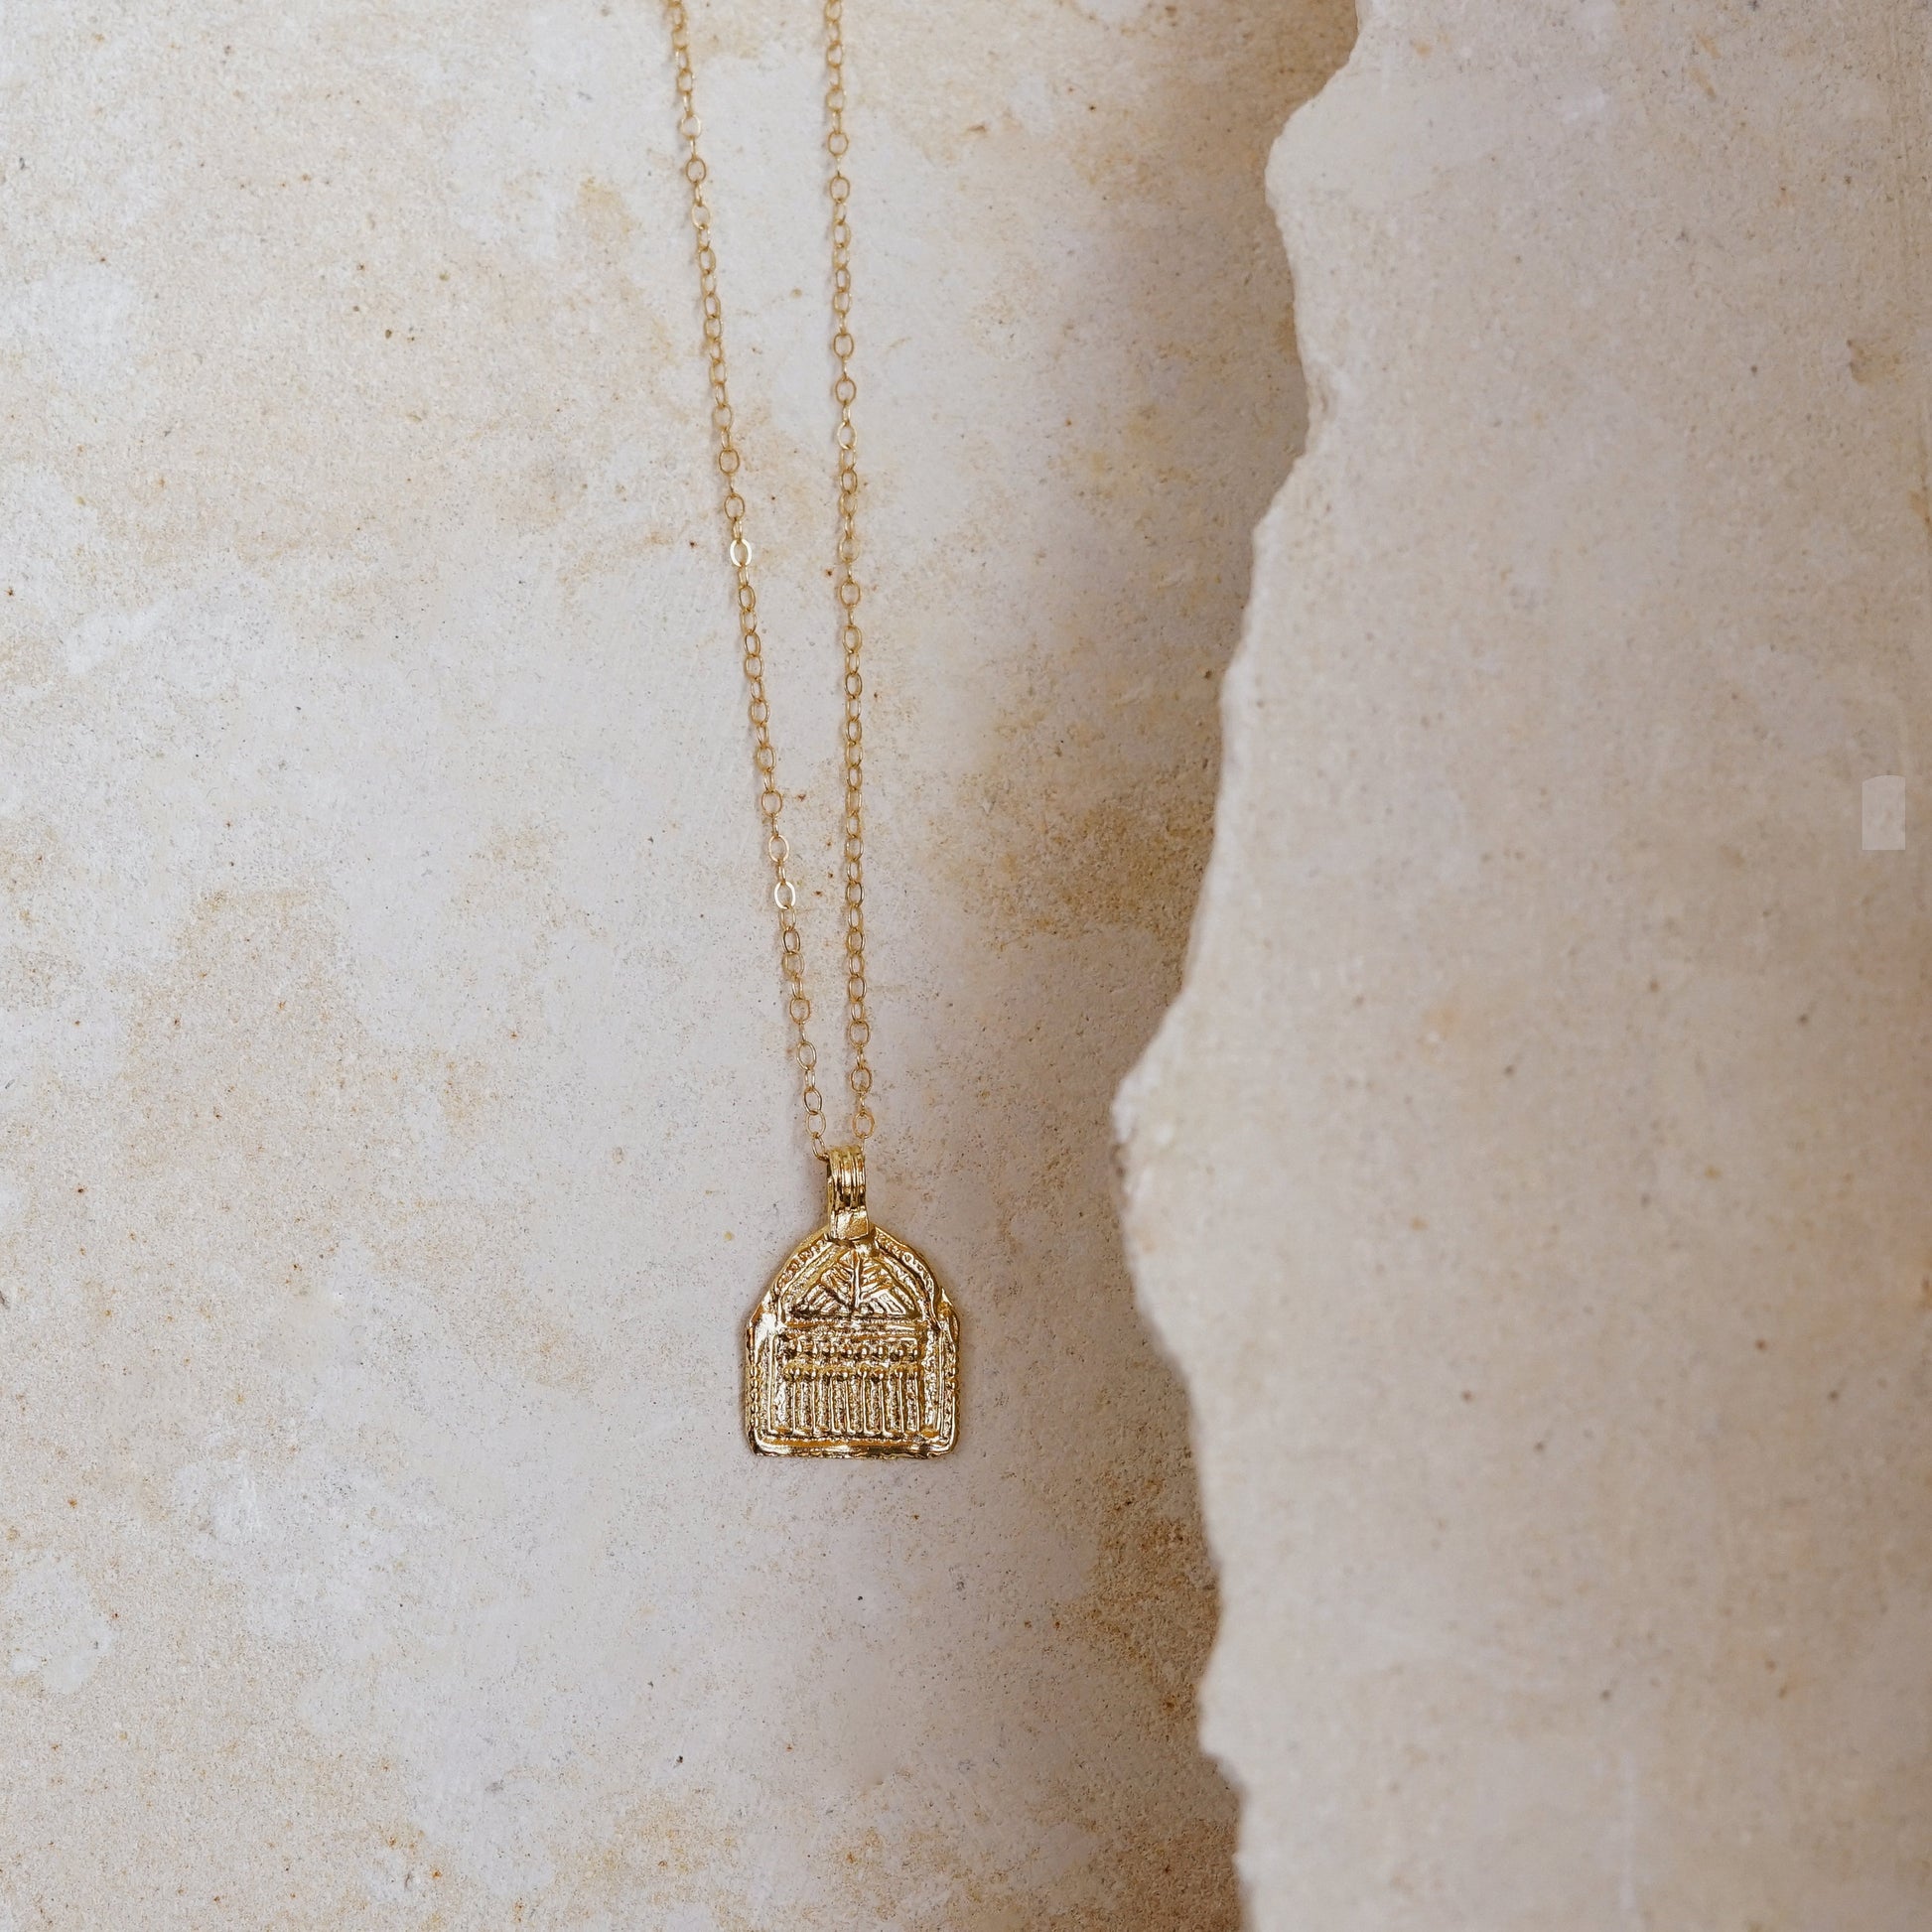 Janus Necklace by Mountainside Jewelry. Delicate light weight hand carved charm necklace designed to represent a door, passageway or opportunity. Recycled brass pendant coated in a thick layer of high grade 14k gold. Handmade in the Santa Cruz Mountains.